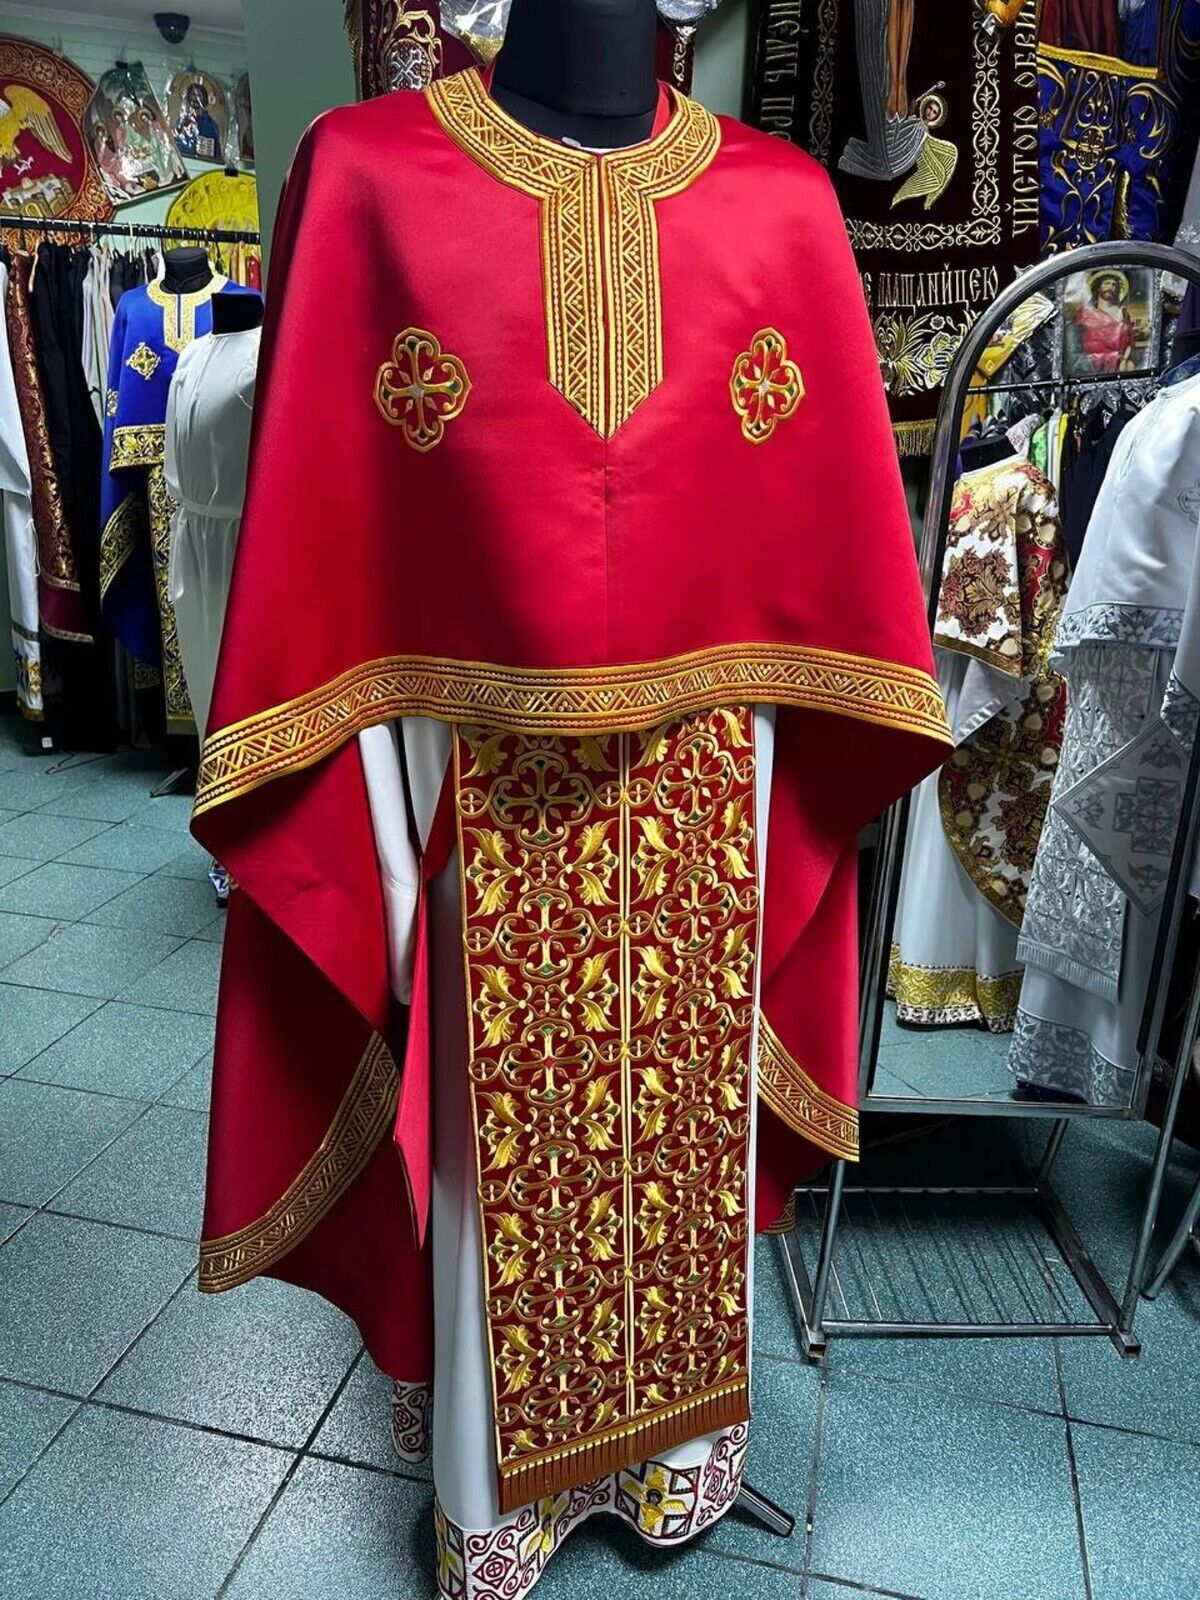 Embroidered Orthodox Greek style vestment with covers